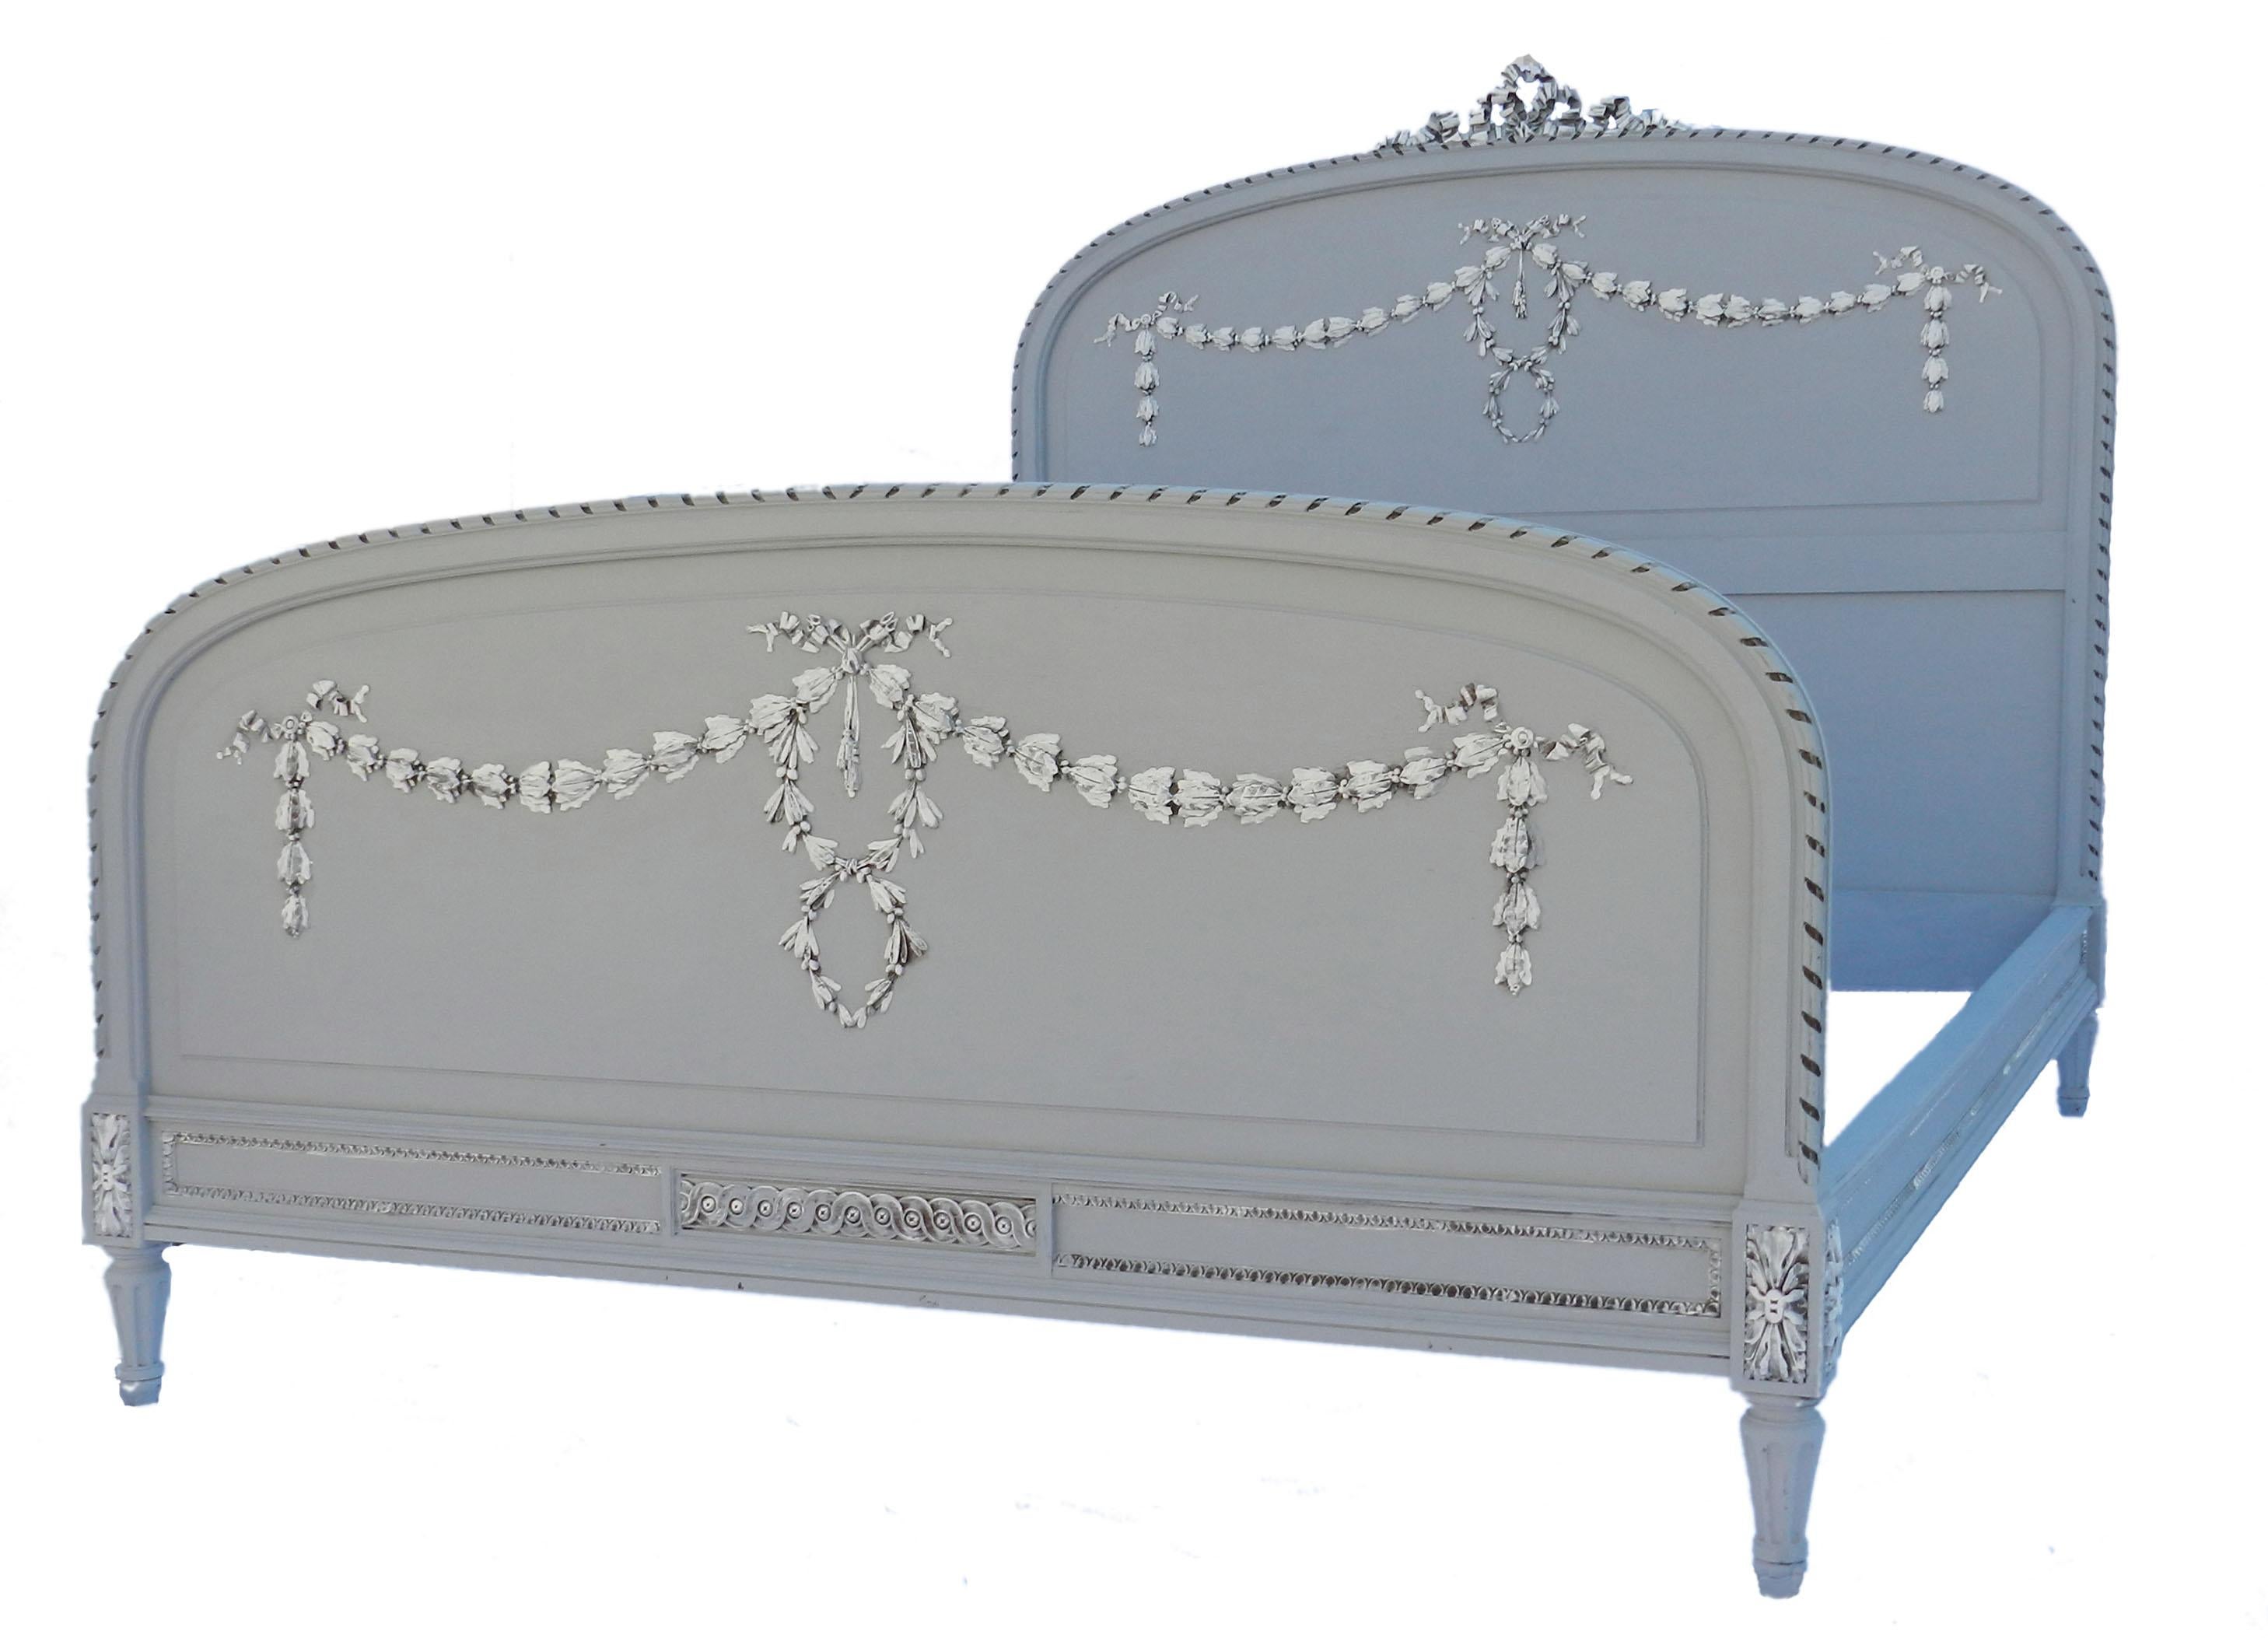 Antique French bed us queen UK king size painted 19th century Louis XV
This antique bed has been hand painted
The foot height is 88cms 34.65ins
Good antique condition with some minor marks of age
This will take a US Queen or a UK King Size bed with